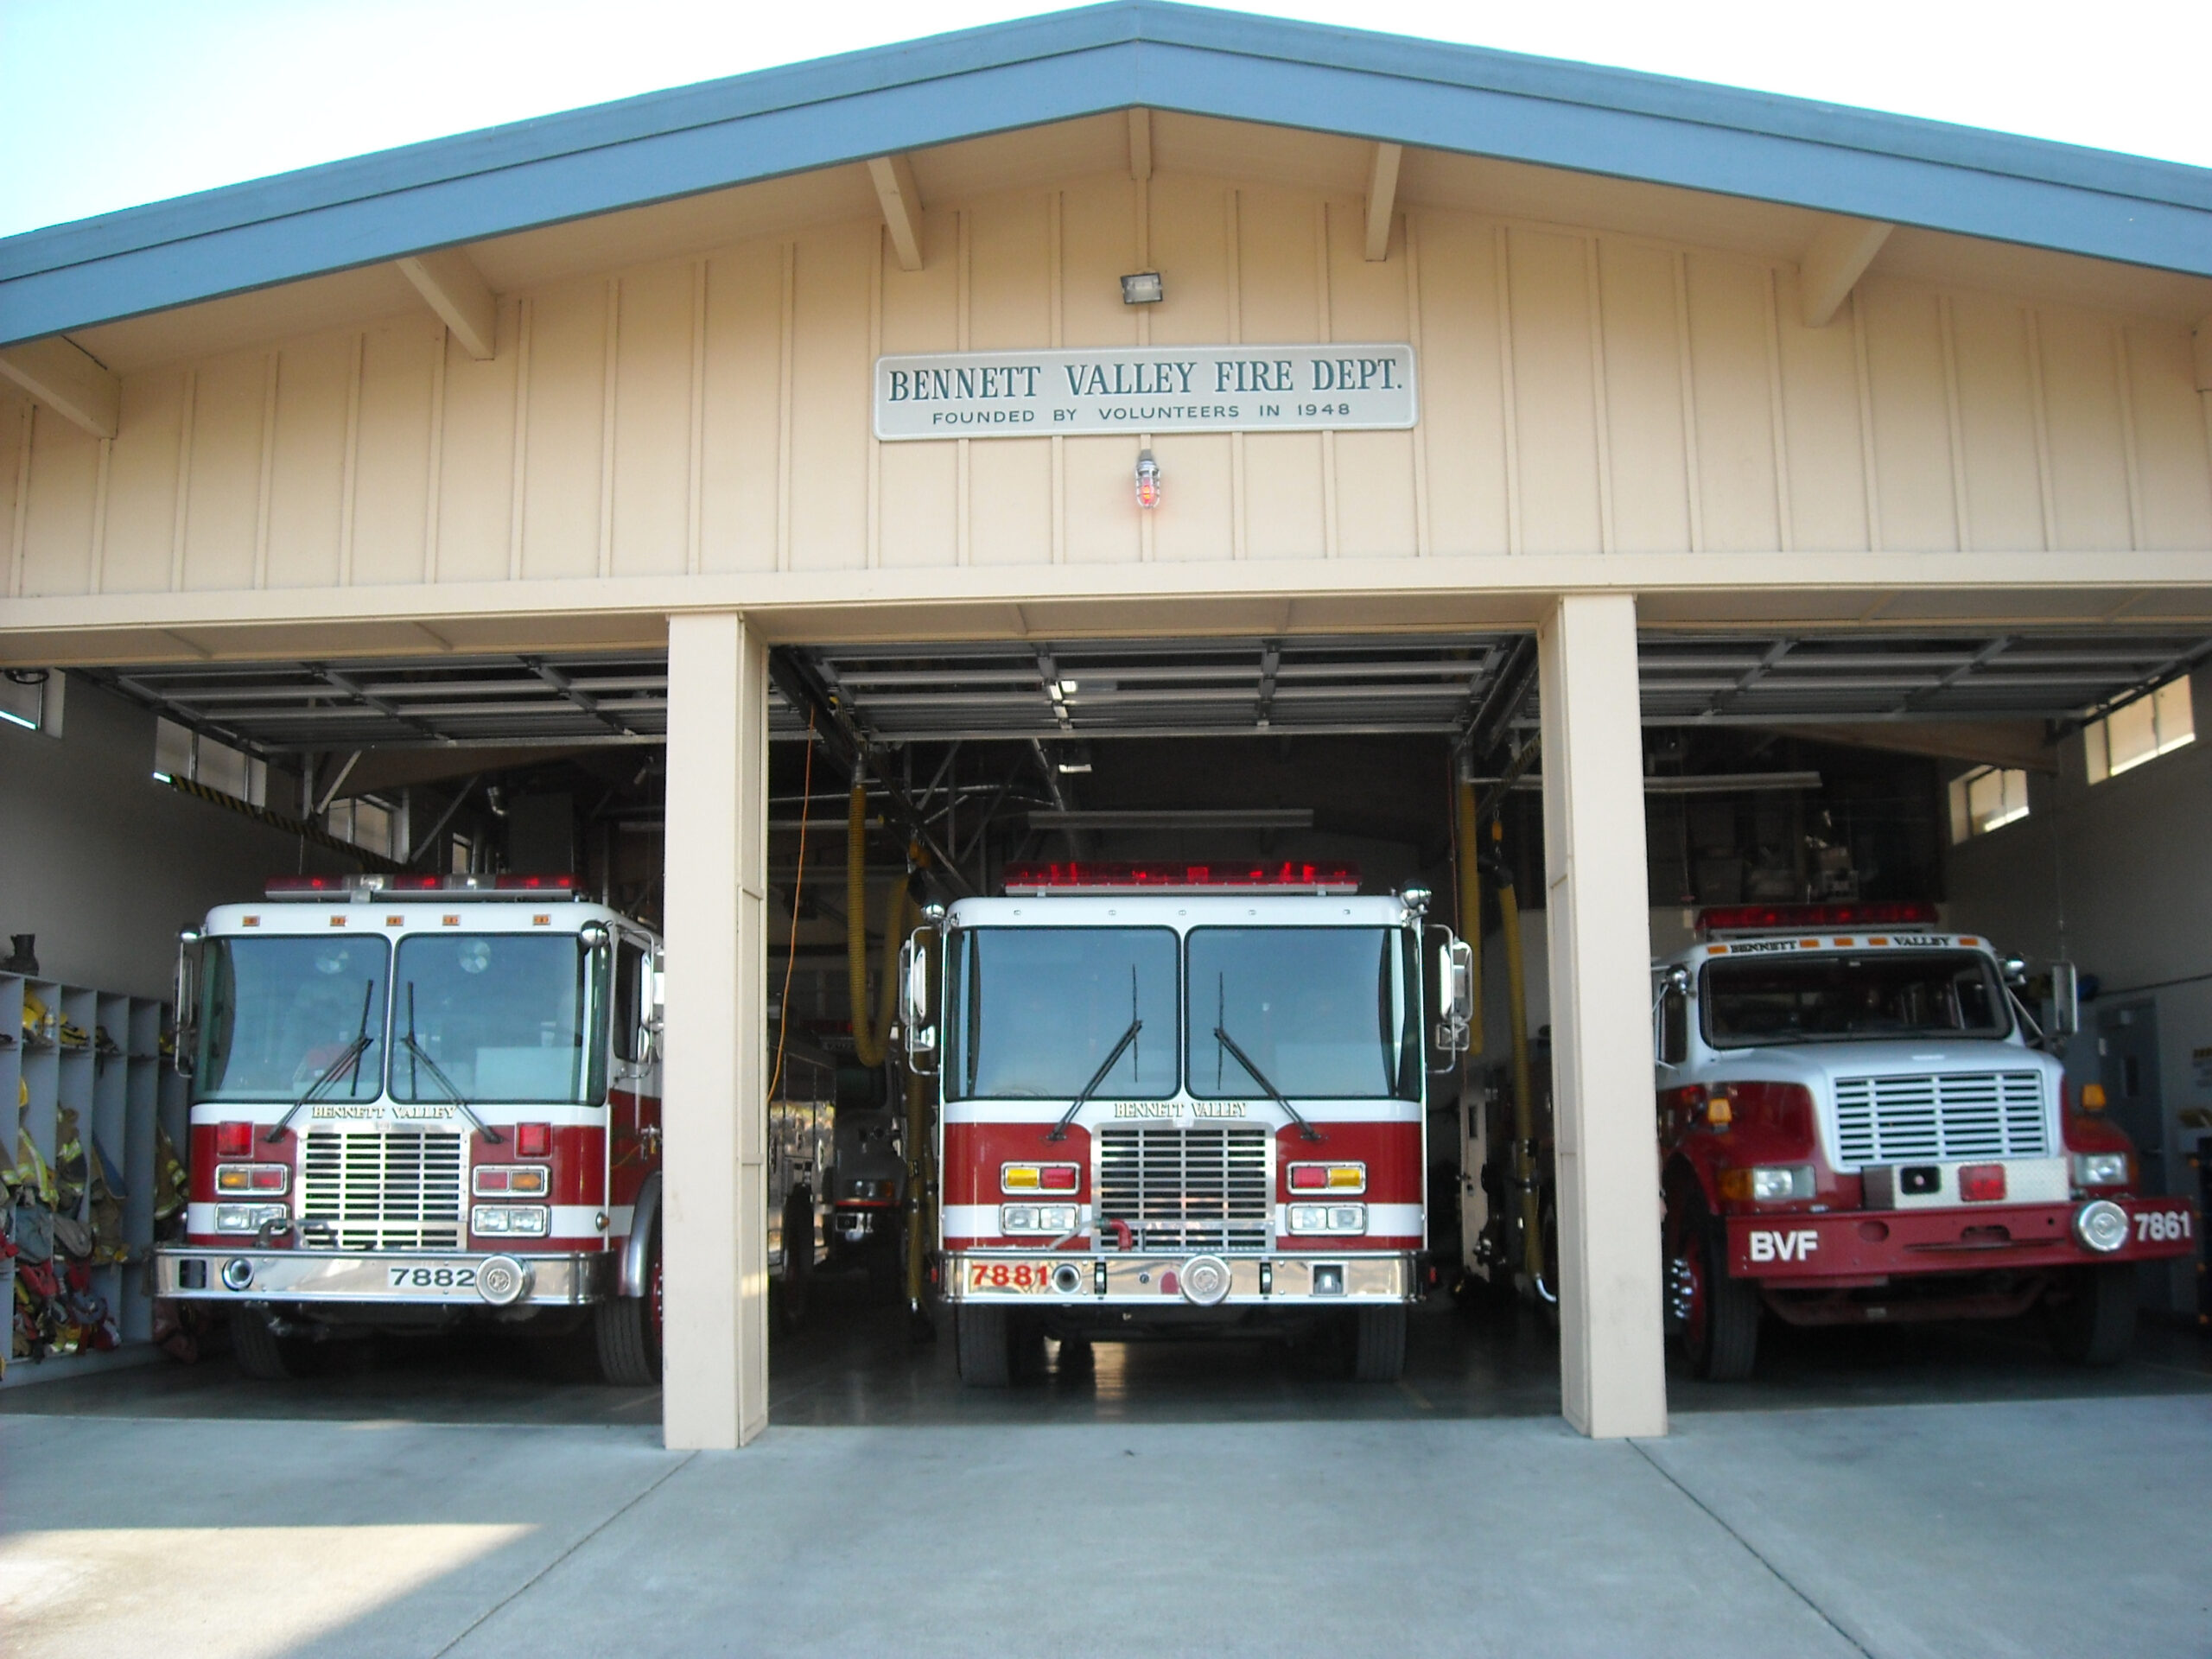 Fire department - Wikipedia Throughout Volunteer Fire Department Budget Template Within Volunteer Fire Department Budget Template